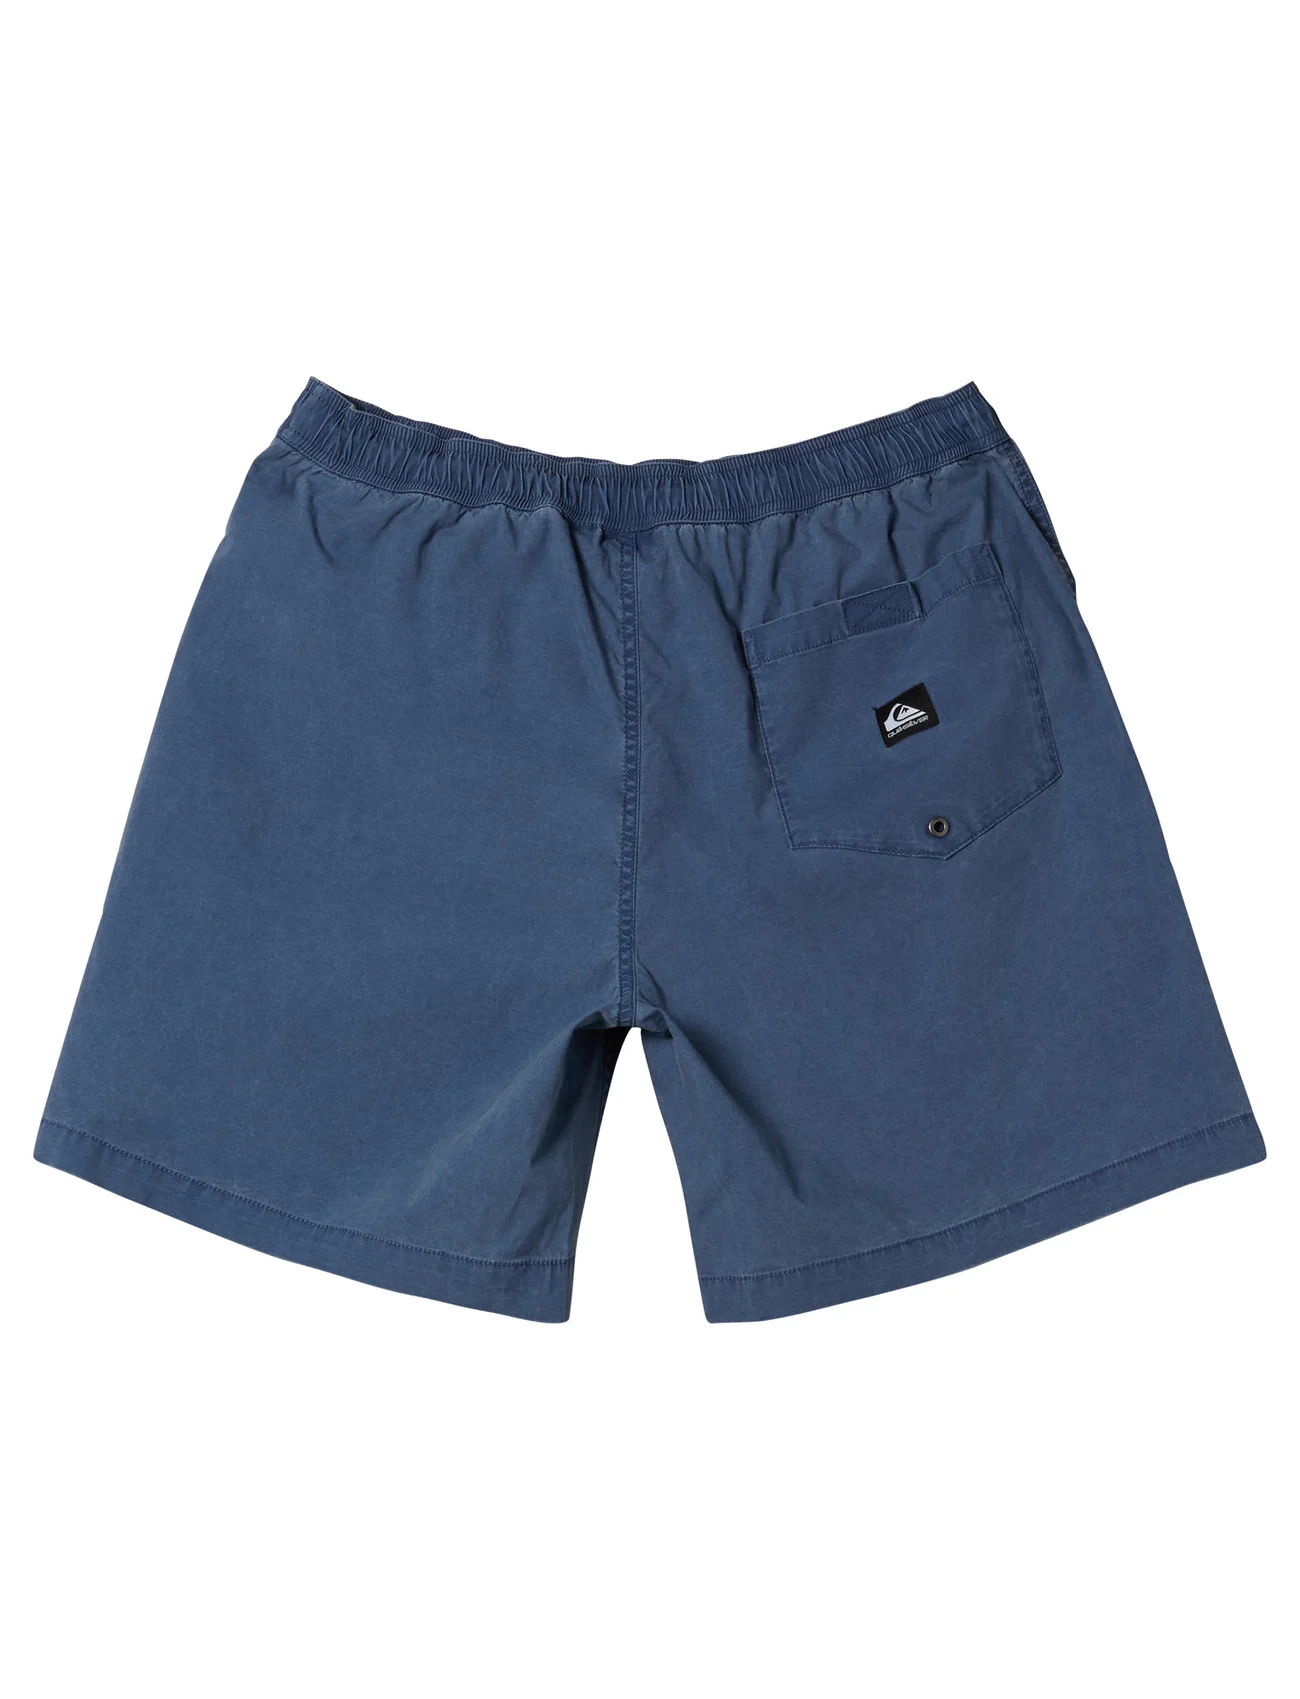 Quiksilver - TAXER - trainingsshorts - crown blue - 1